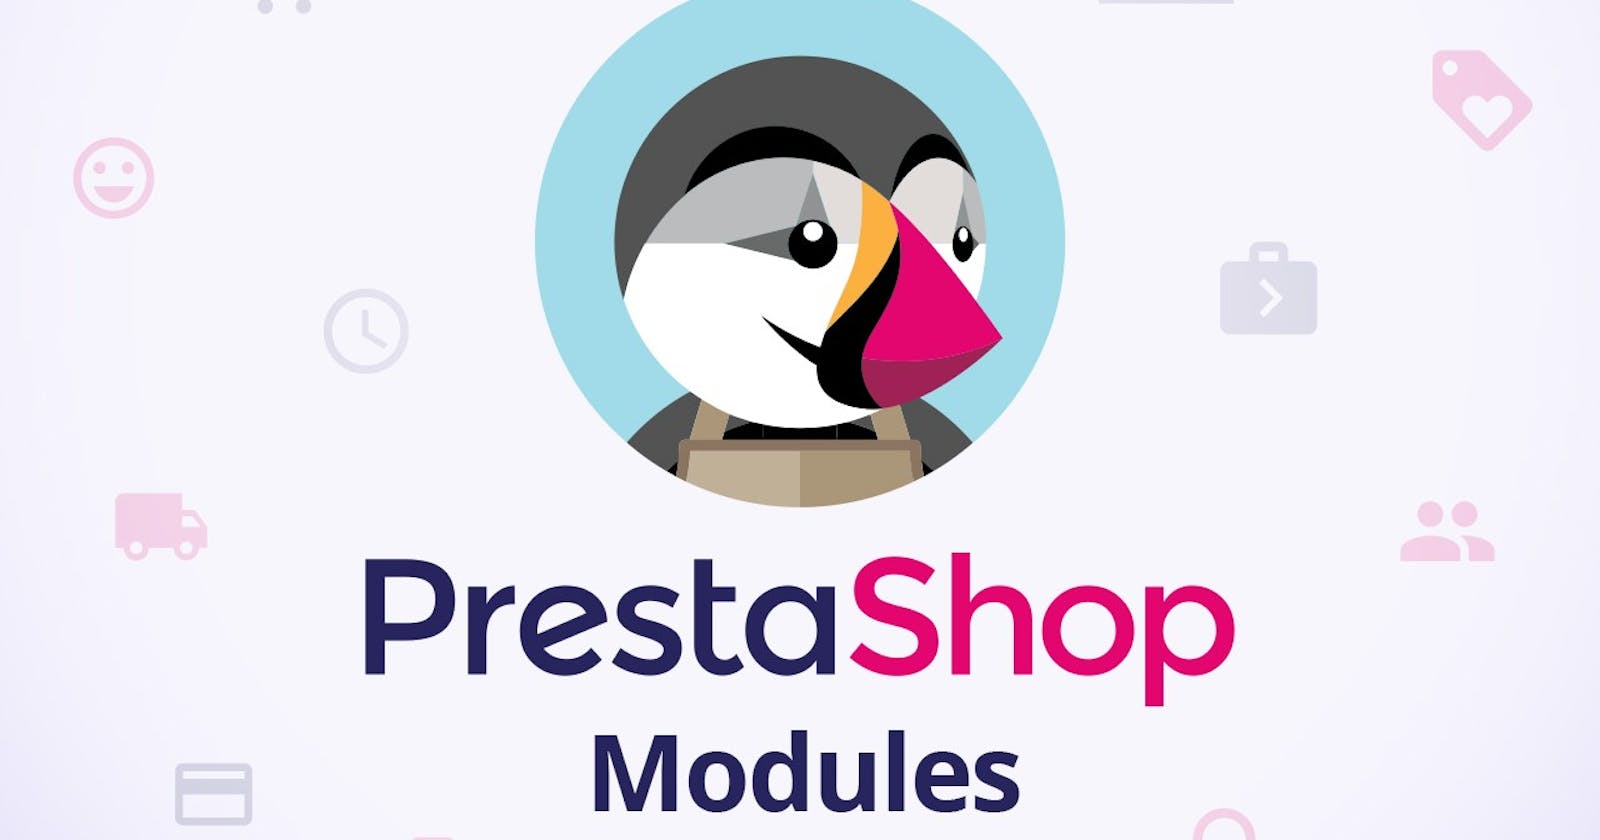 Things you should know before starting Prestashop development